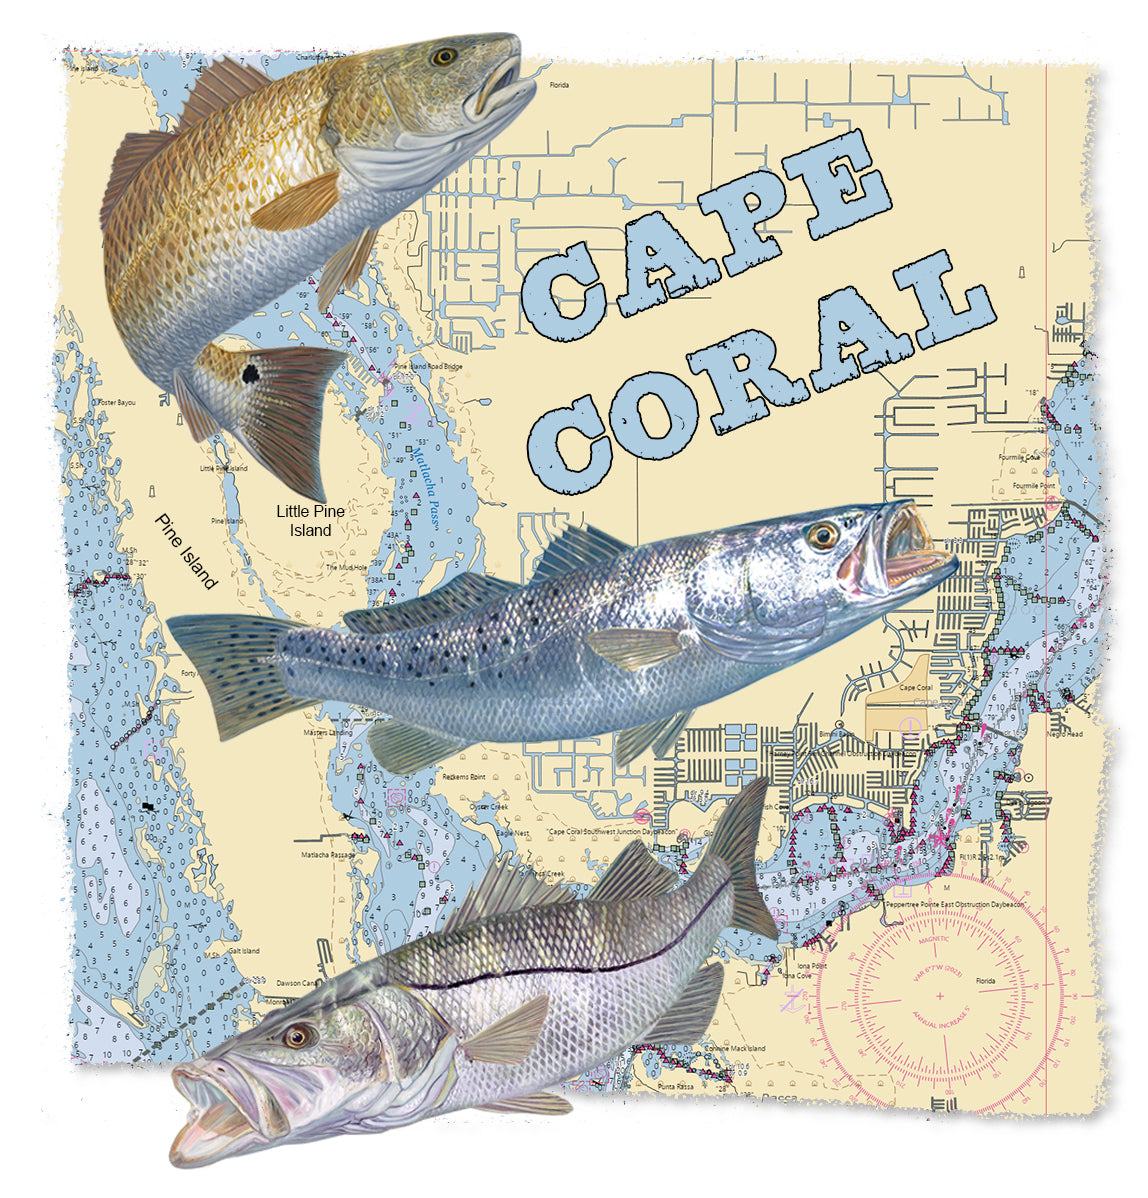 Cape Coral Florida Fishing Shirts for Men Redfish Speckled Sea Trout Snook Red Drum Seatrout X-Large / Ice Blue